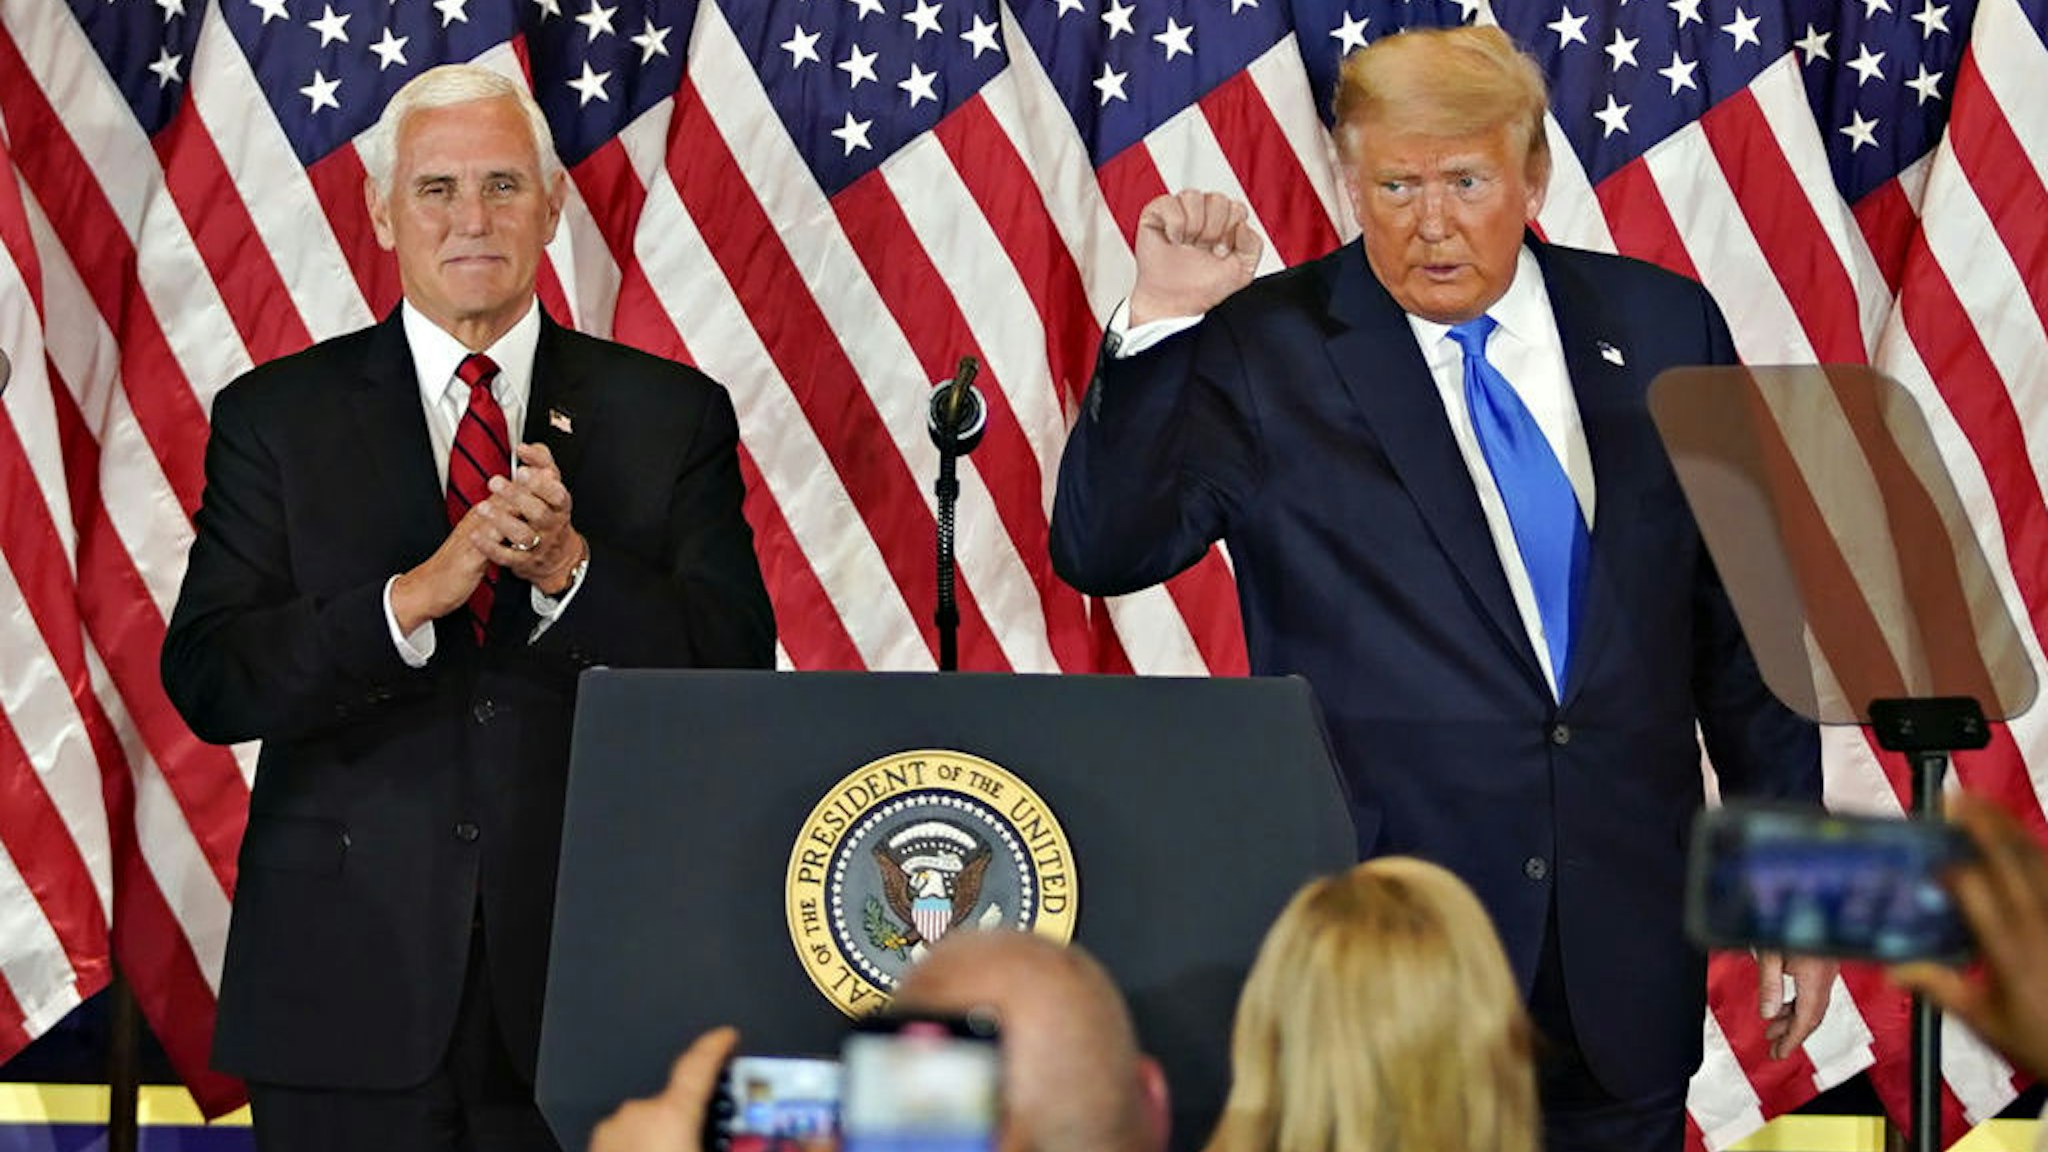 U.S. President Donald Trump gestures after speaking during an election night party with U.S. Vice President Mike Pence, left, in the East Room of the White House in Washington, D.C., U.S., on Wednesday, Nov. 4, 2020. Trump declared he had won re-election against Joe Biden and said he would ask the Supreme Court to intervene, even as several battleground states continue to count votes. Photographer: Al Drago/Bloomberg